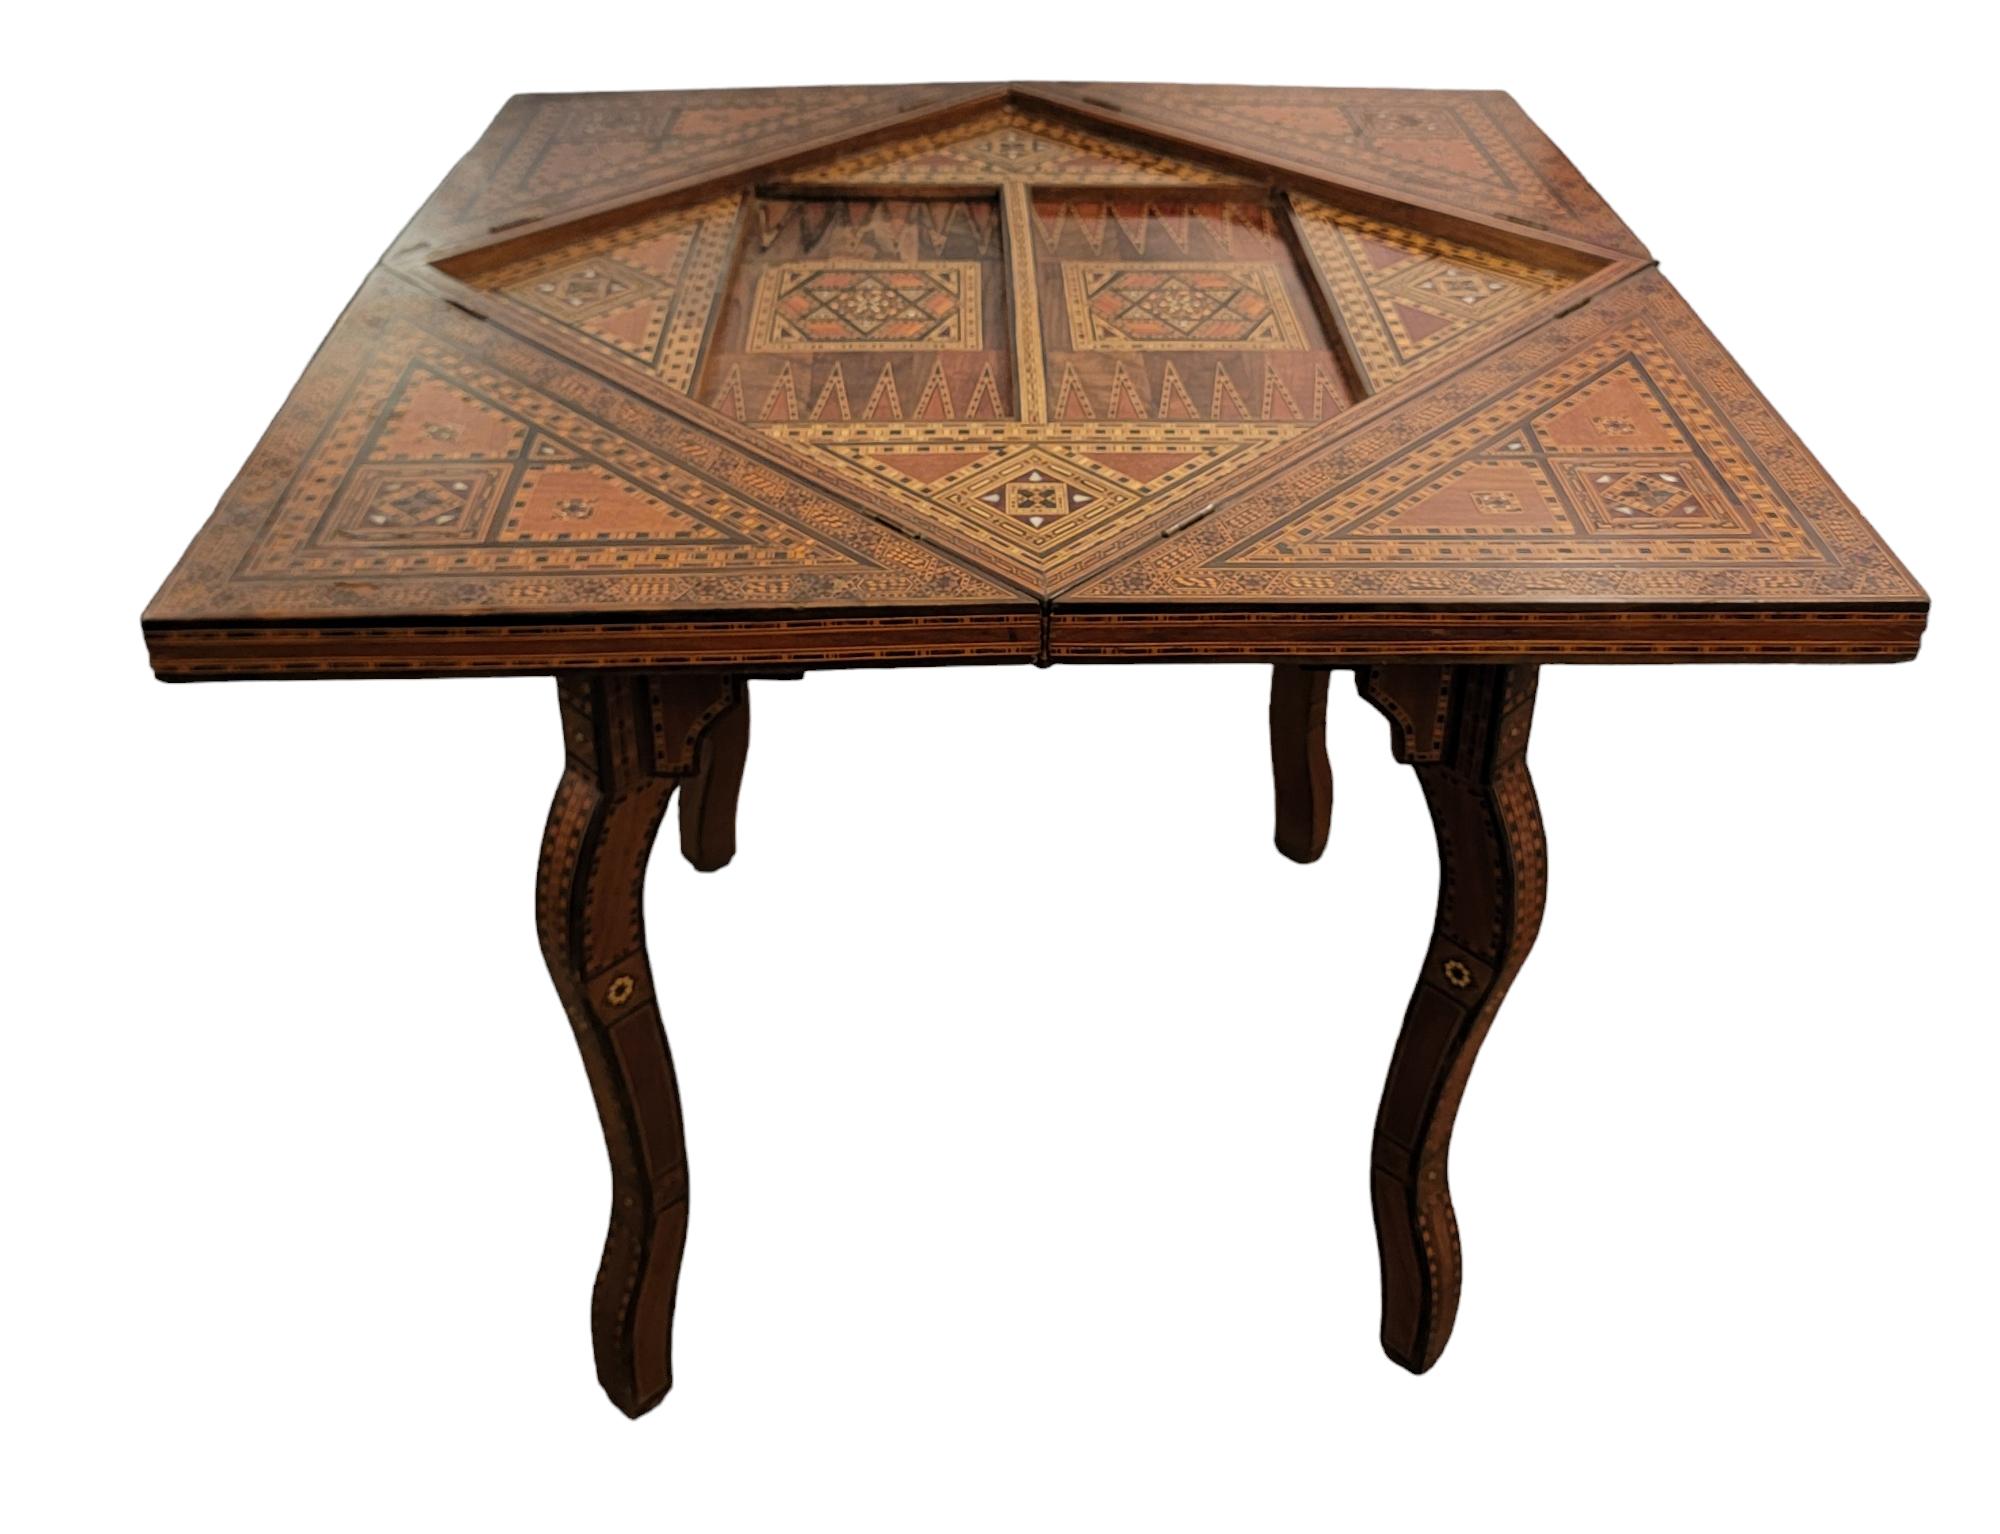 Antique Hand Made Inlaid Multi Game Table. Greta game table has multiple uses for Chess, Checkers, Backgammon, cards, etc. Table extends at the corners different angles of use. This may be adjusted to sit on a corner or float in the middle of a